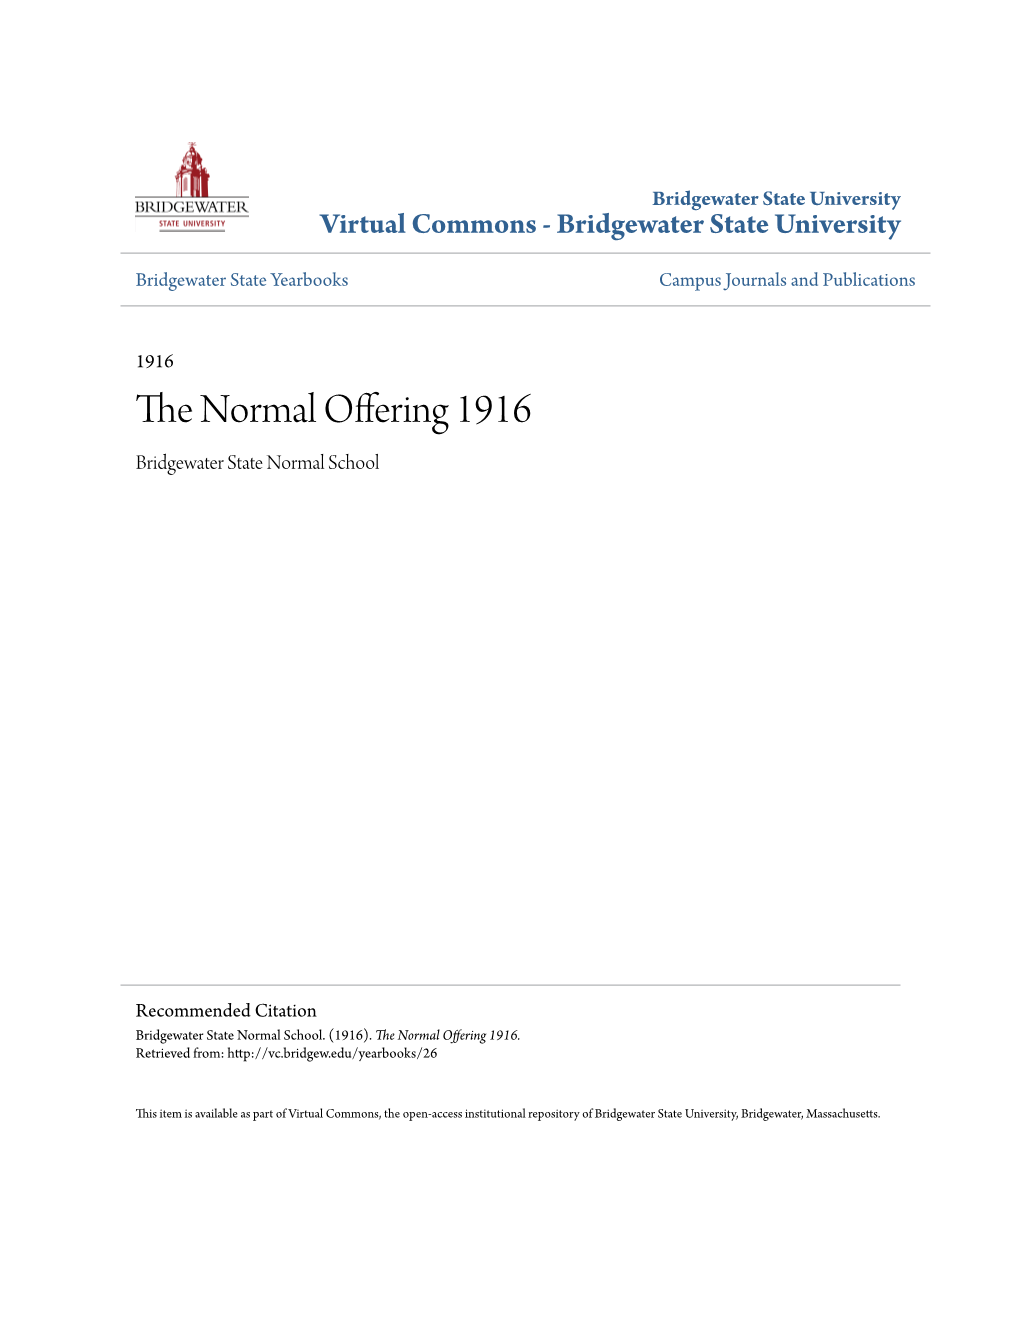 The Normal Offering 1916